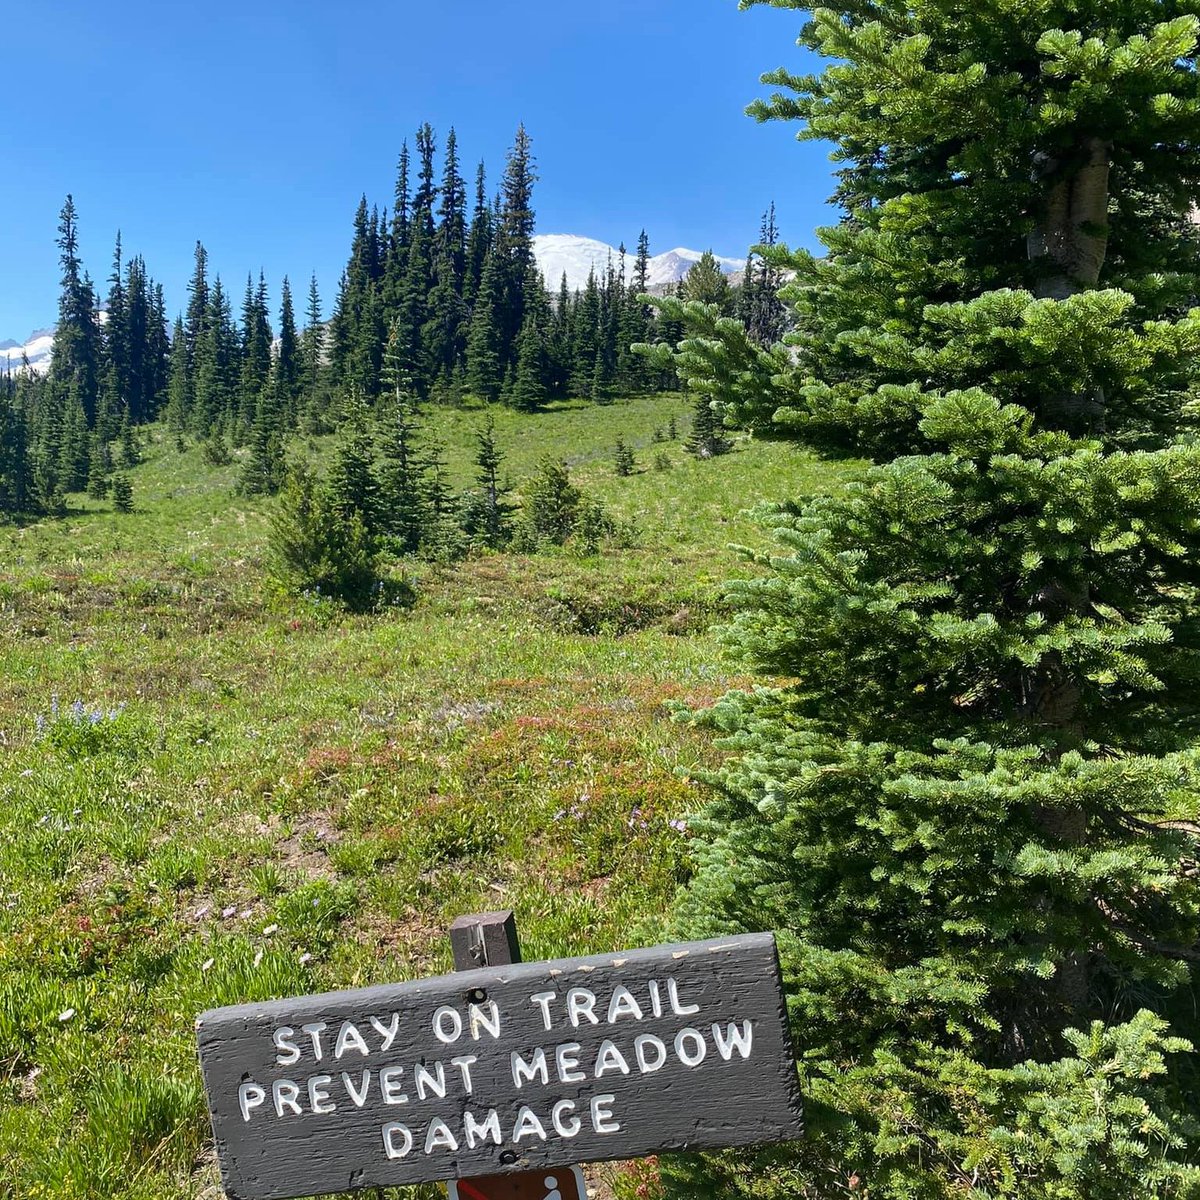 The great outdoors are for everyone to enjoy, so let's make sure we're being mindful of others by staying on designated paths and trails 🚶‍♀️🚶‍♂️ #MountRainier #MtBakerSnoqualmie #GiffordPinchot #recreateresponsibly